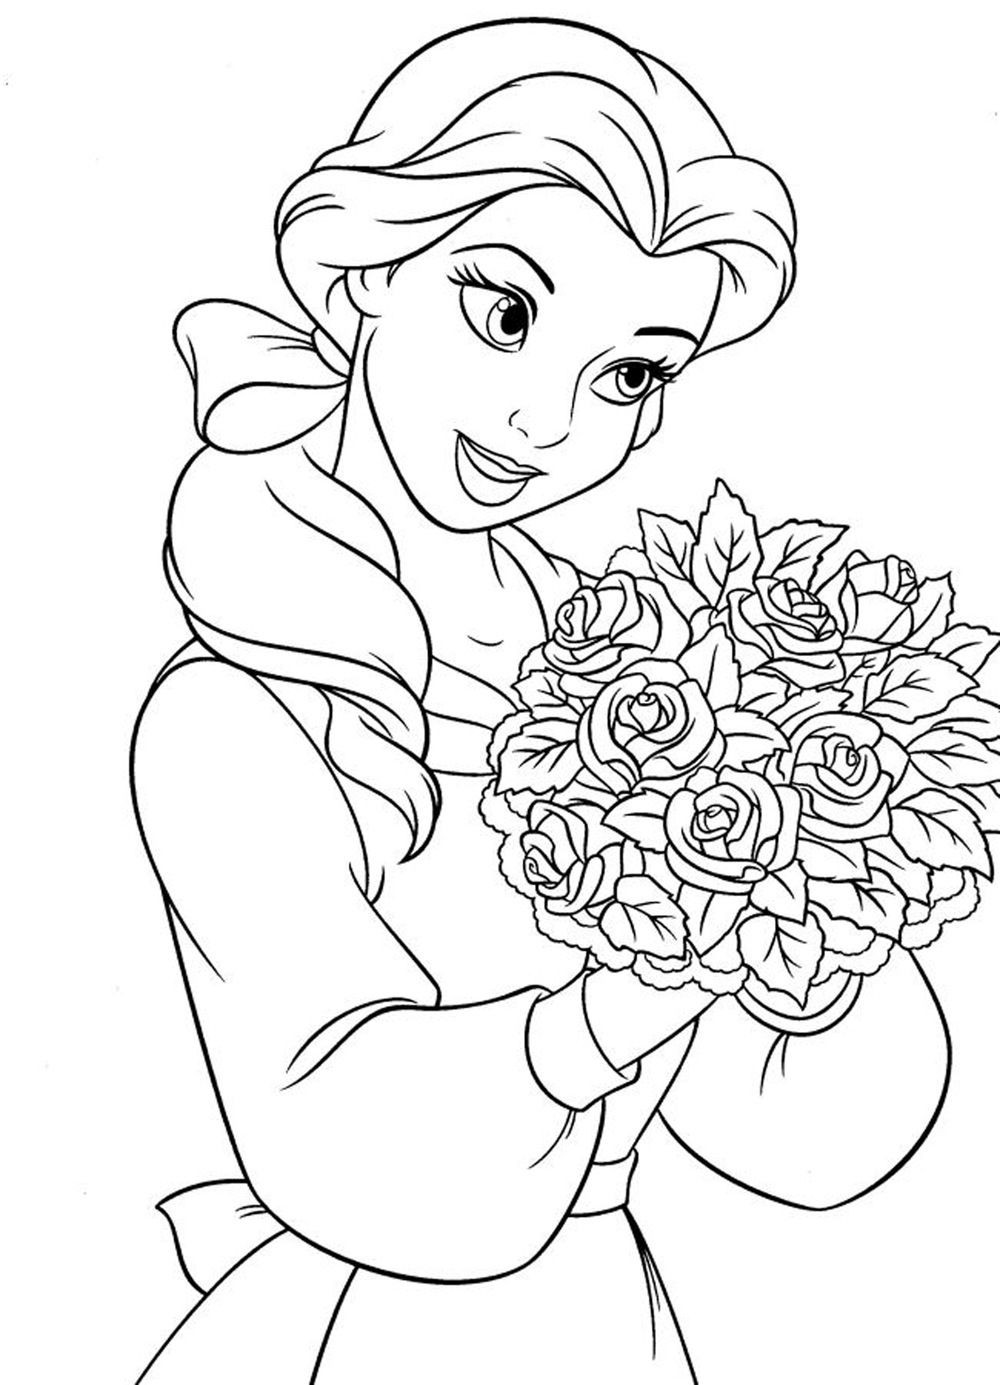 Printable Princess Coloring Pages For Girls
 princess coloring pages for girls Free